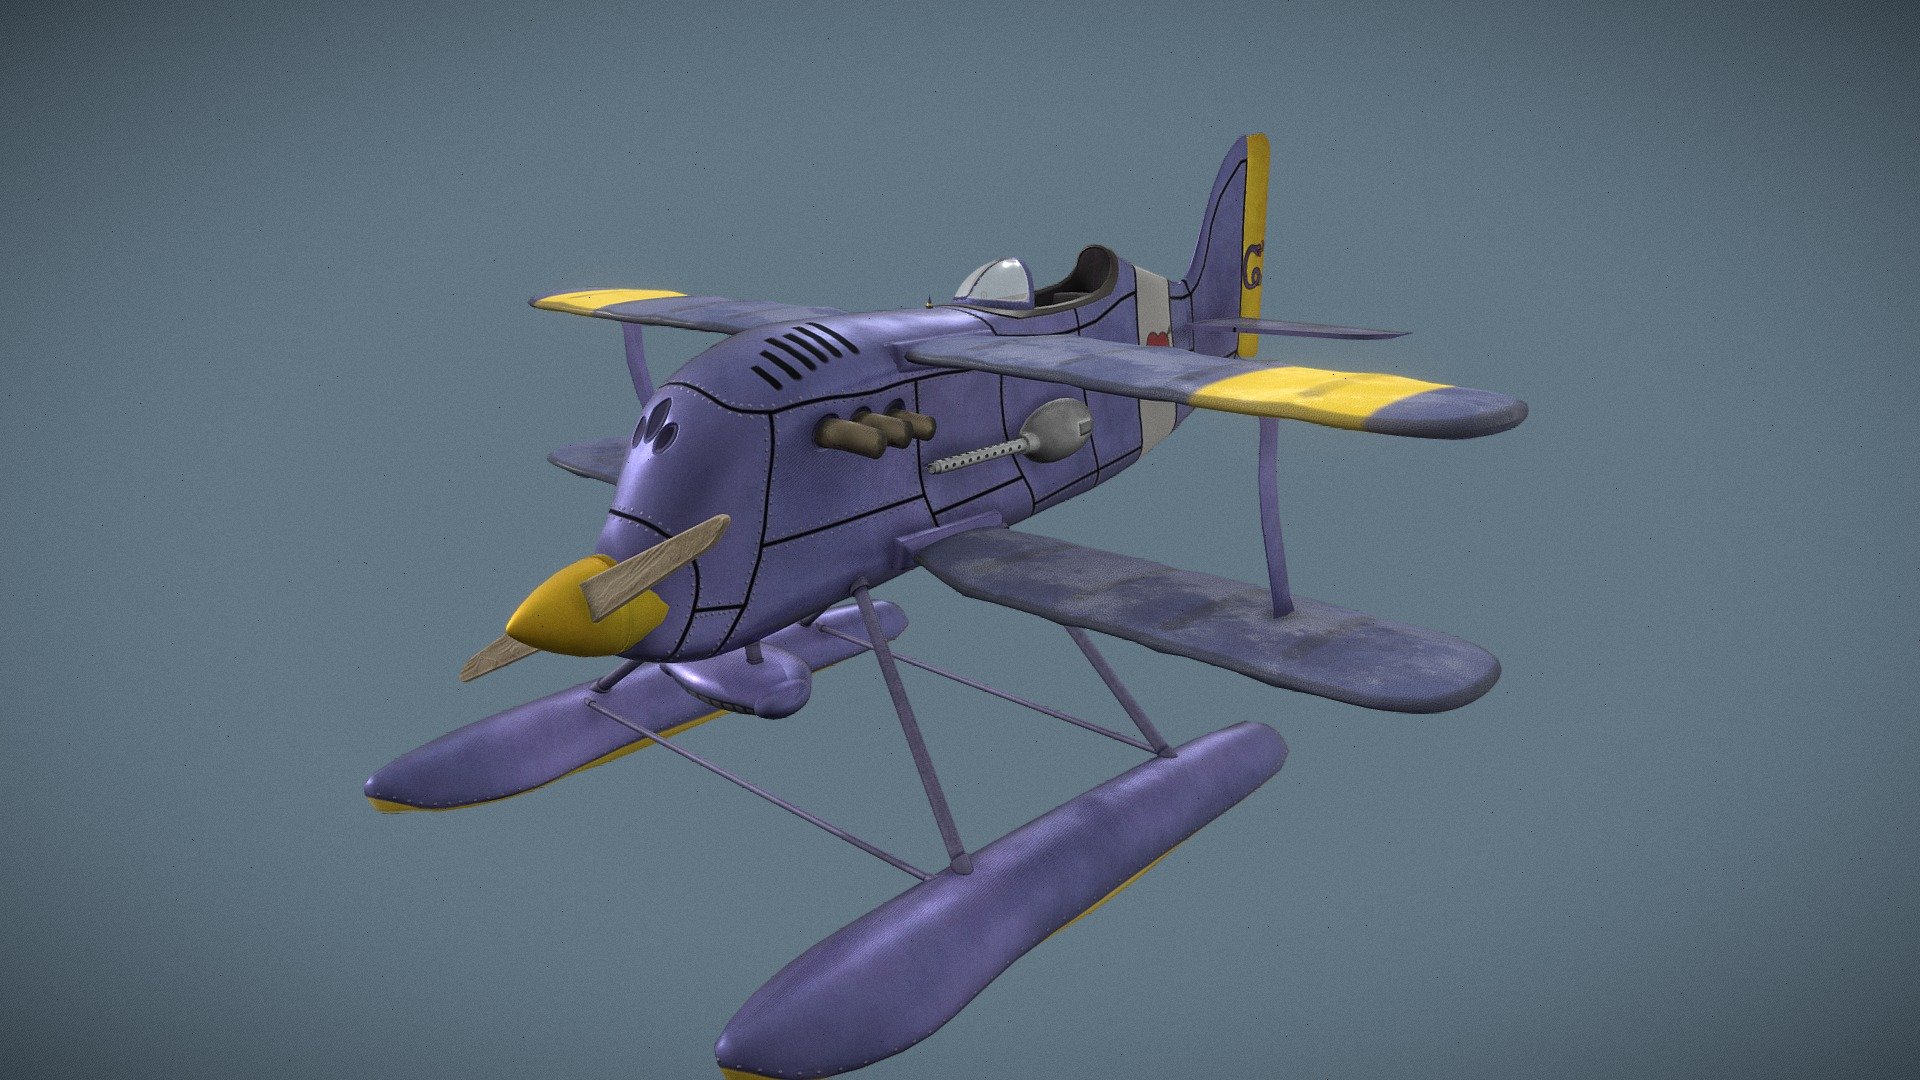 From the studio Ghibli movie Porco Rosso. Its the Curtiss R3C-0 flown by Donald Curtiss in the movie. Based this off concept art for the seaplane that before it was finalized in the movie 3d model